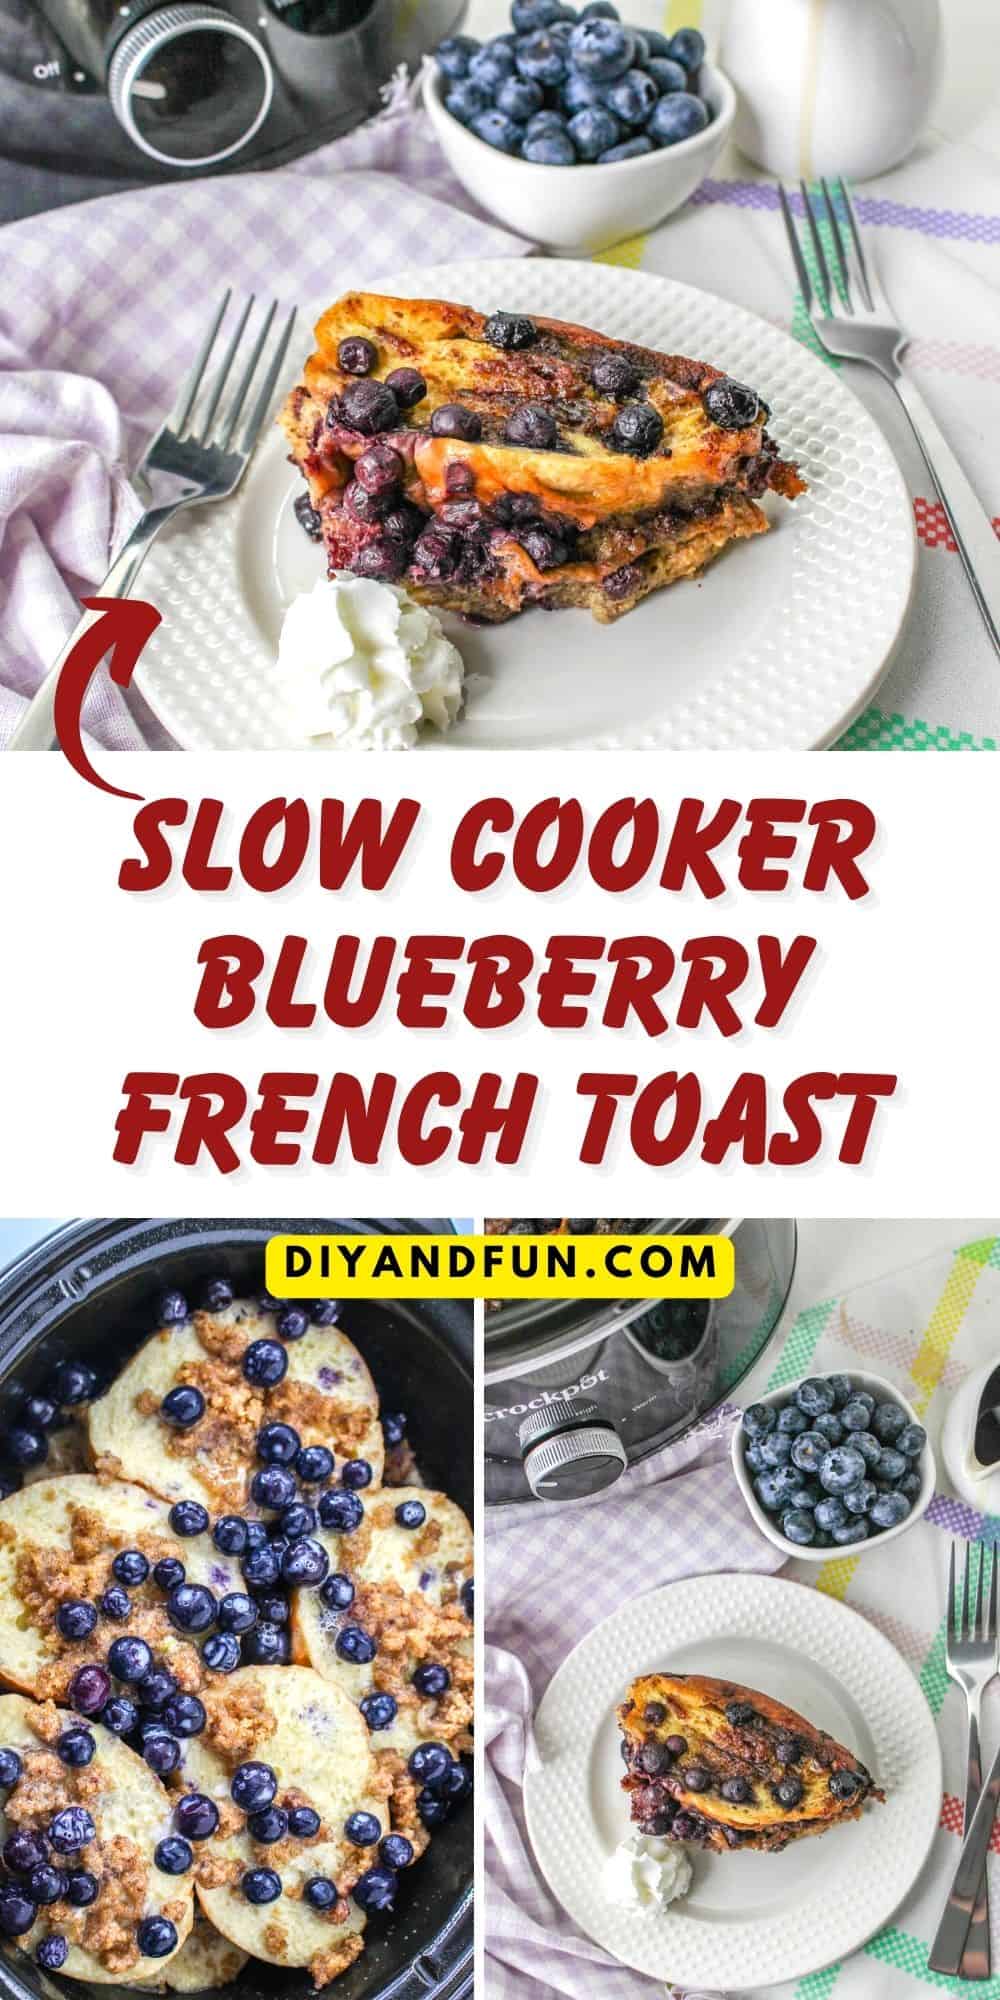 Slow Cooker Blueberry French Toast, a delicious breakfast or brunch recipe that combines classic French toast with blueberries.